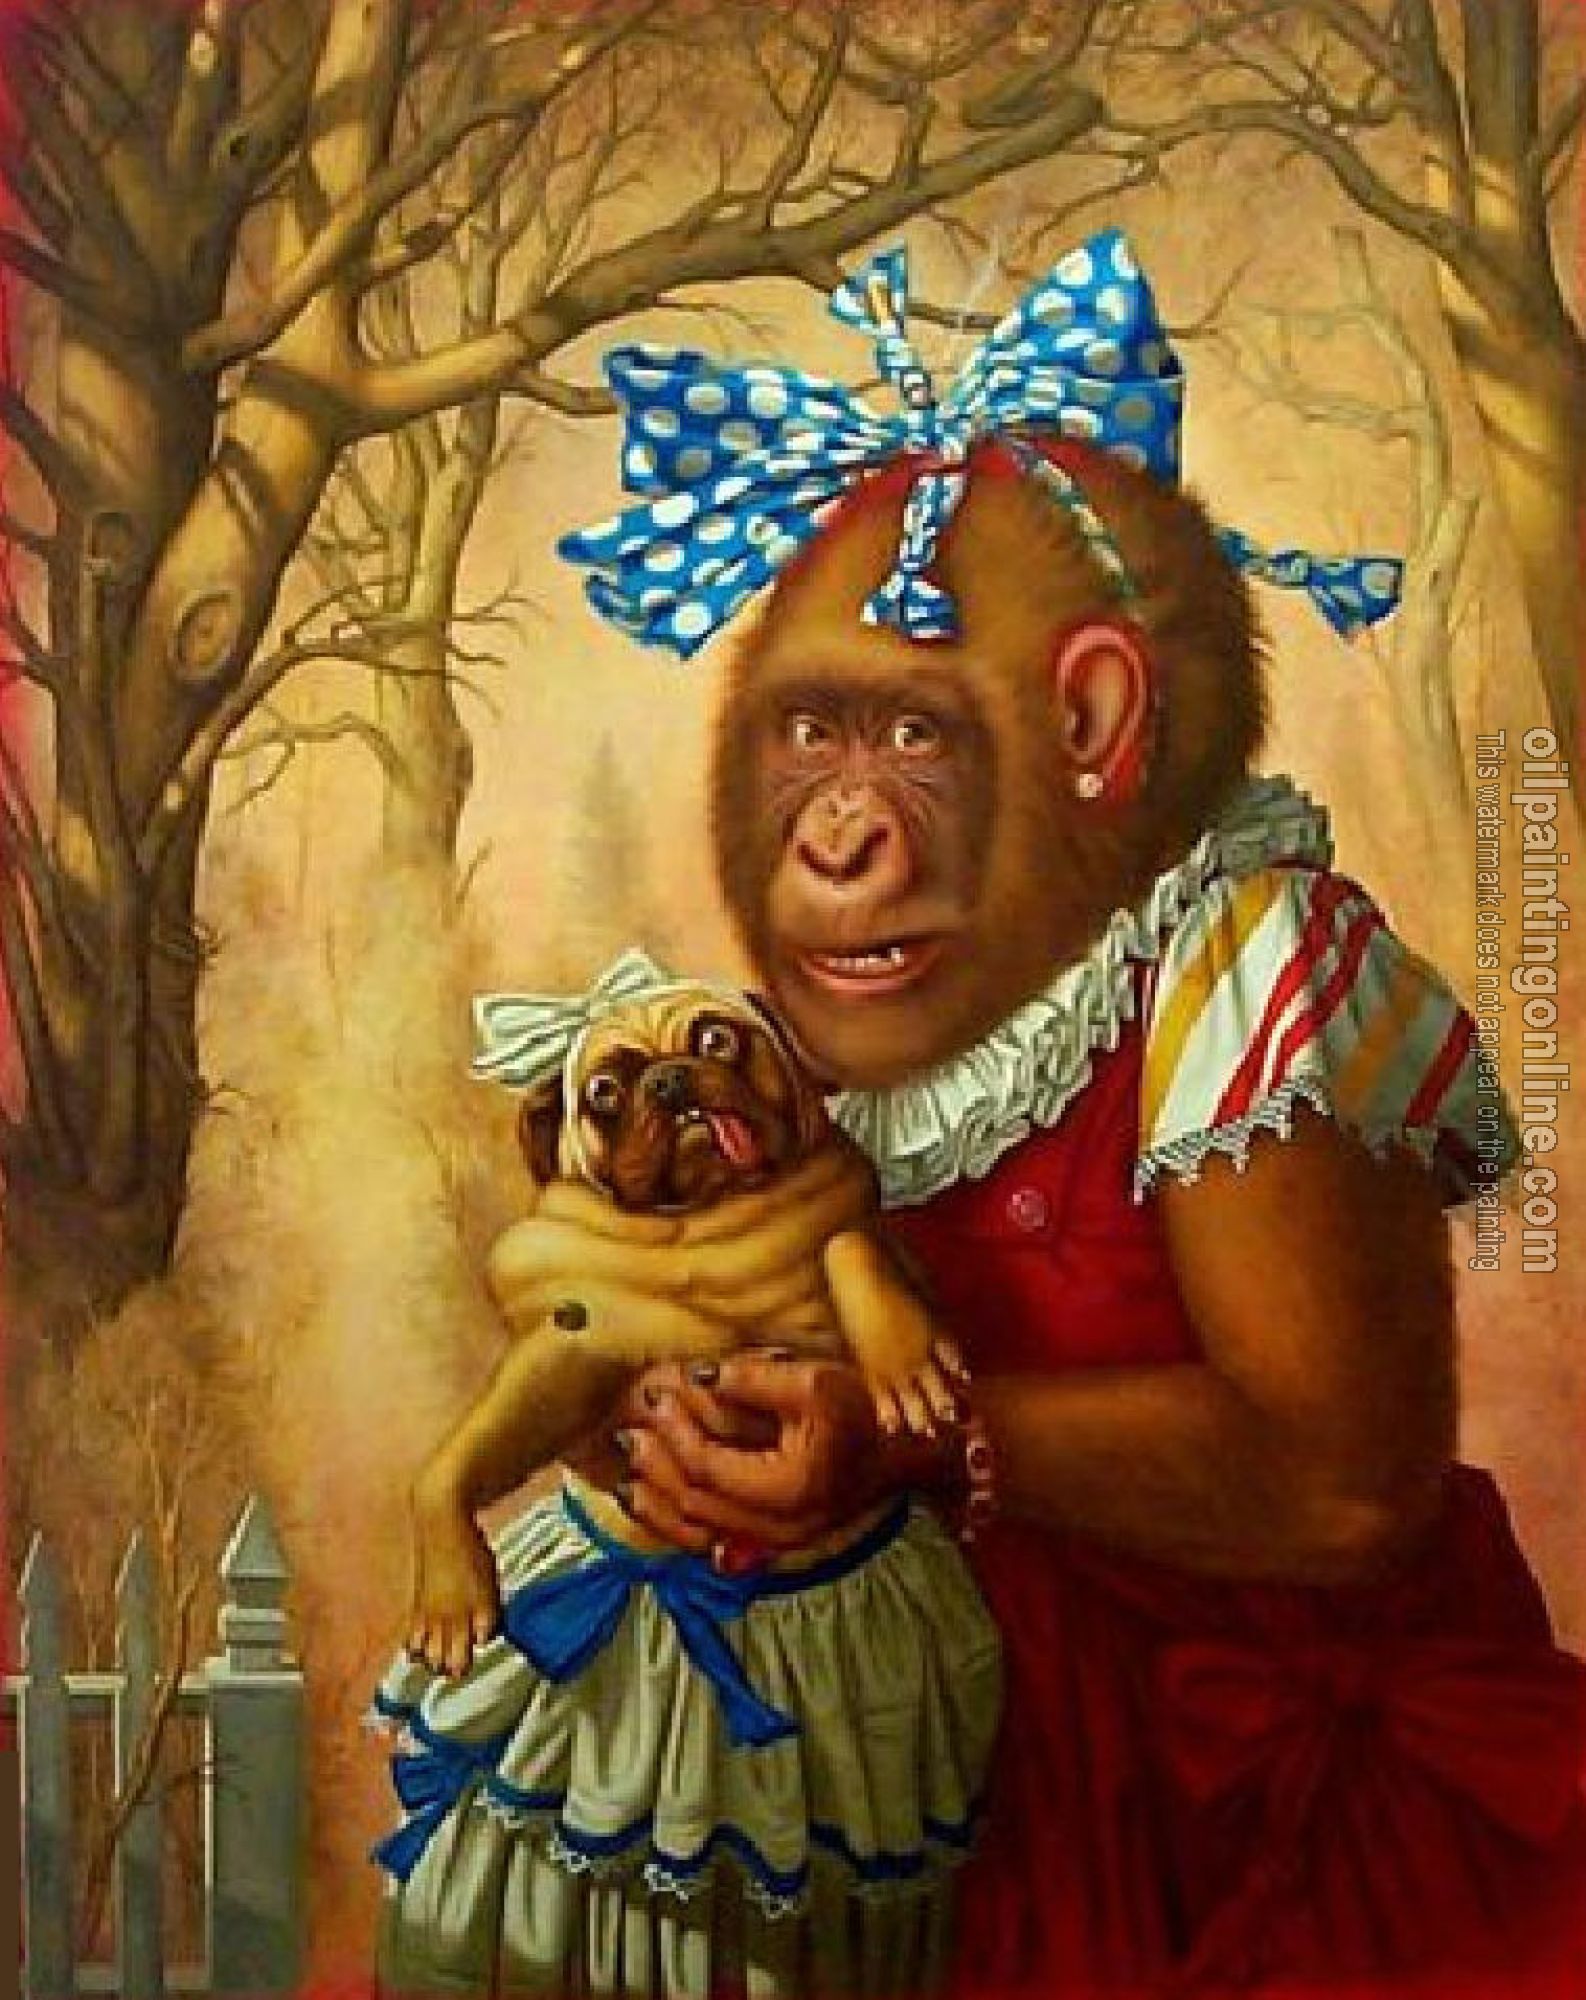 Oil Painting Reproduction - Dressing monkey